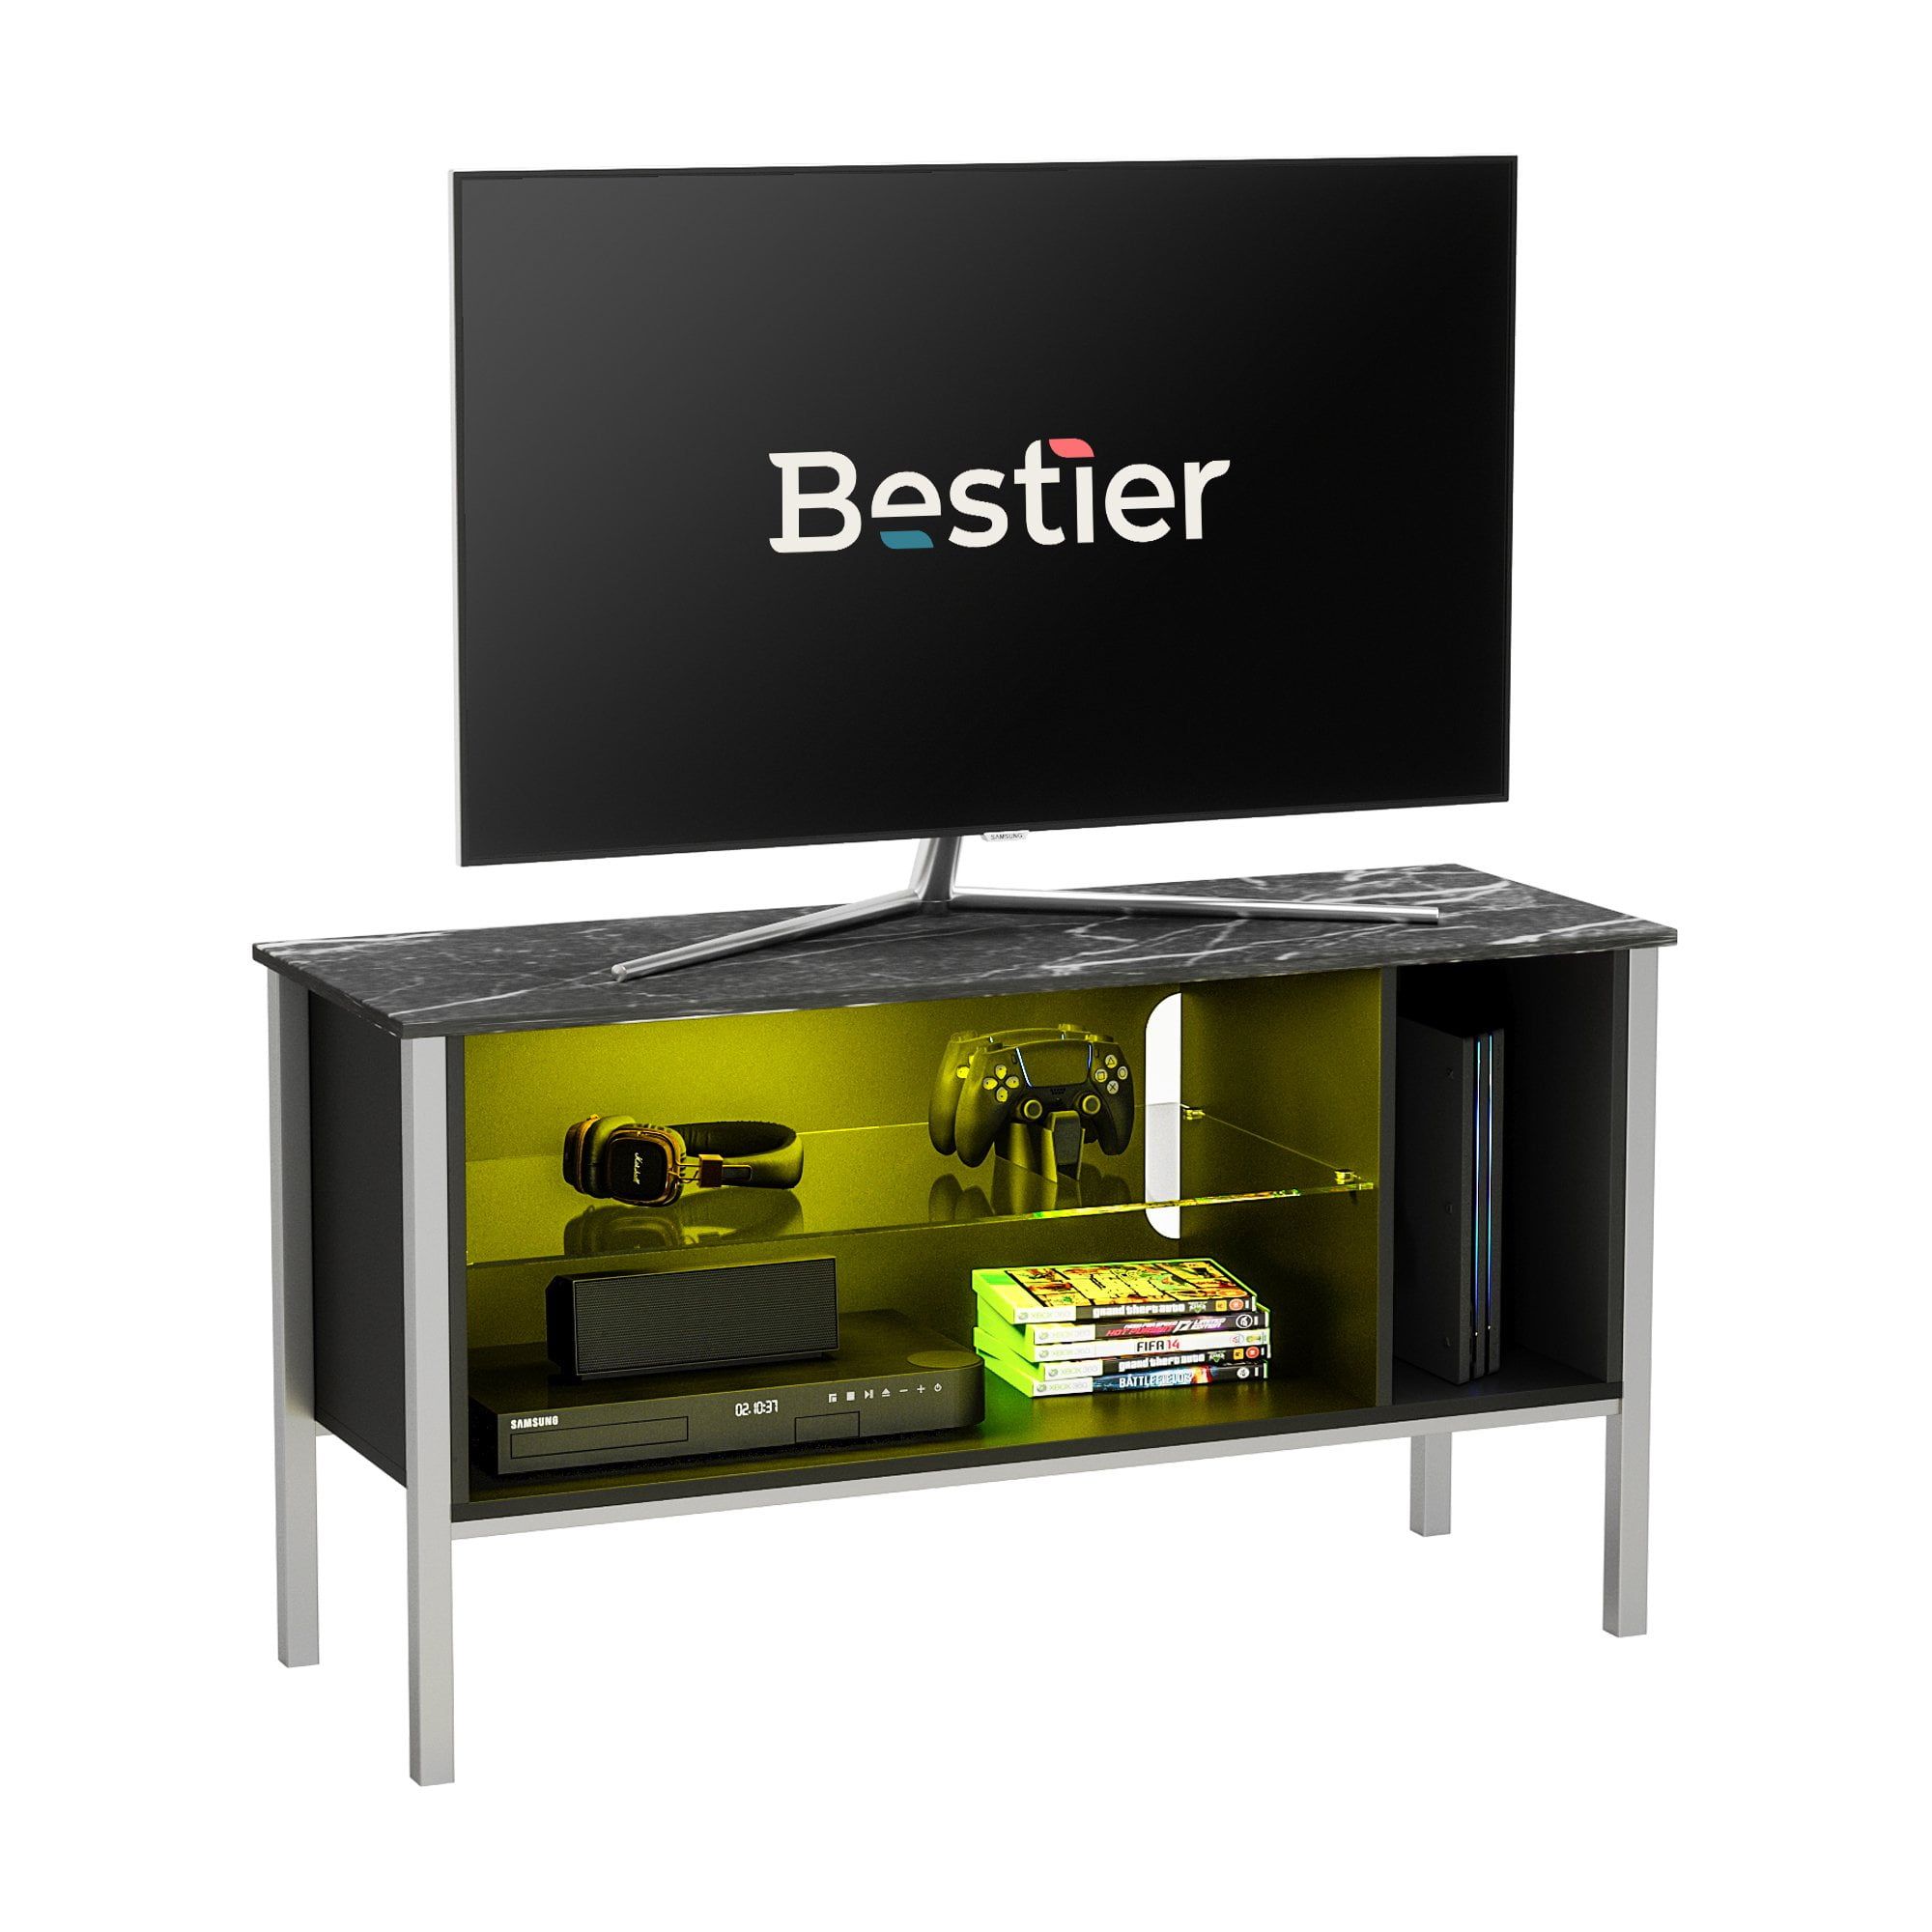 Bestier Gaming Tv Stand For Tvs Up To 50" With Led Light & Storage Intended For Bestier Tv Stand For Tvs Up To 75" (Gallery 20 of 20)